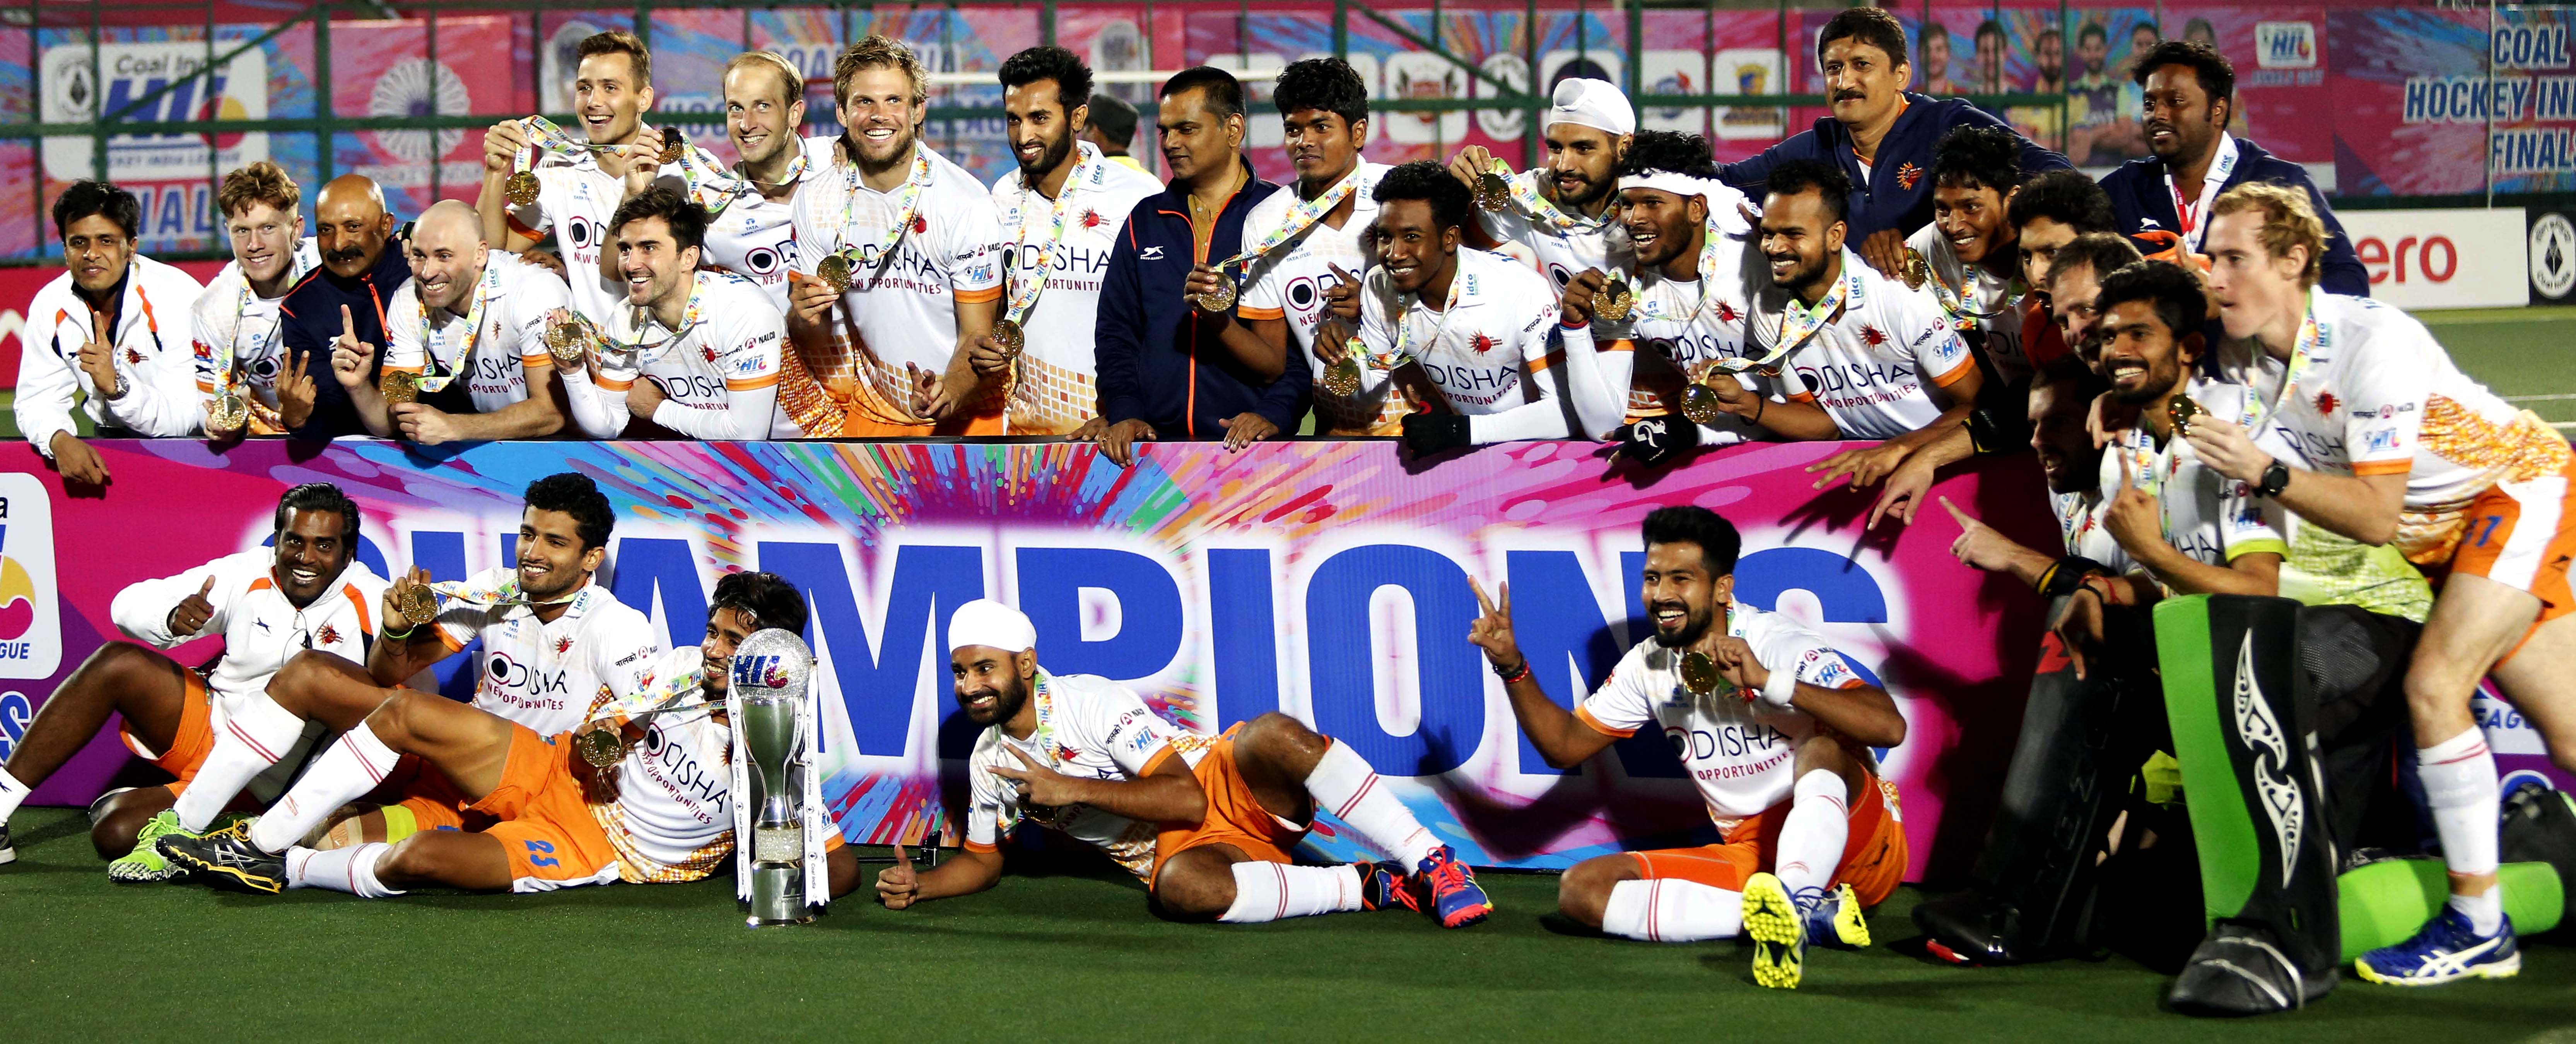 Members of Kalinga Lancers celebrate their title triumph in Hockey India League at Chandigarh on Feb 26, 2017.